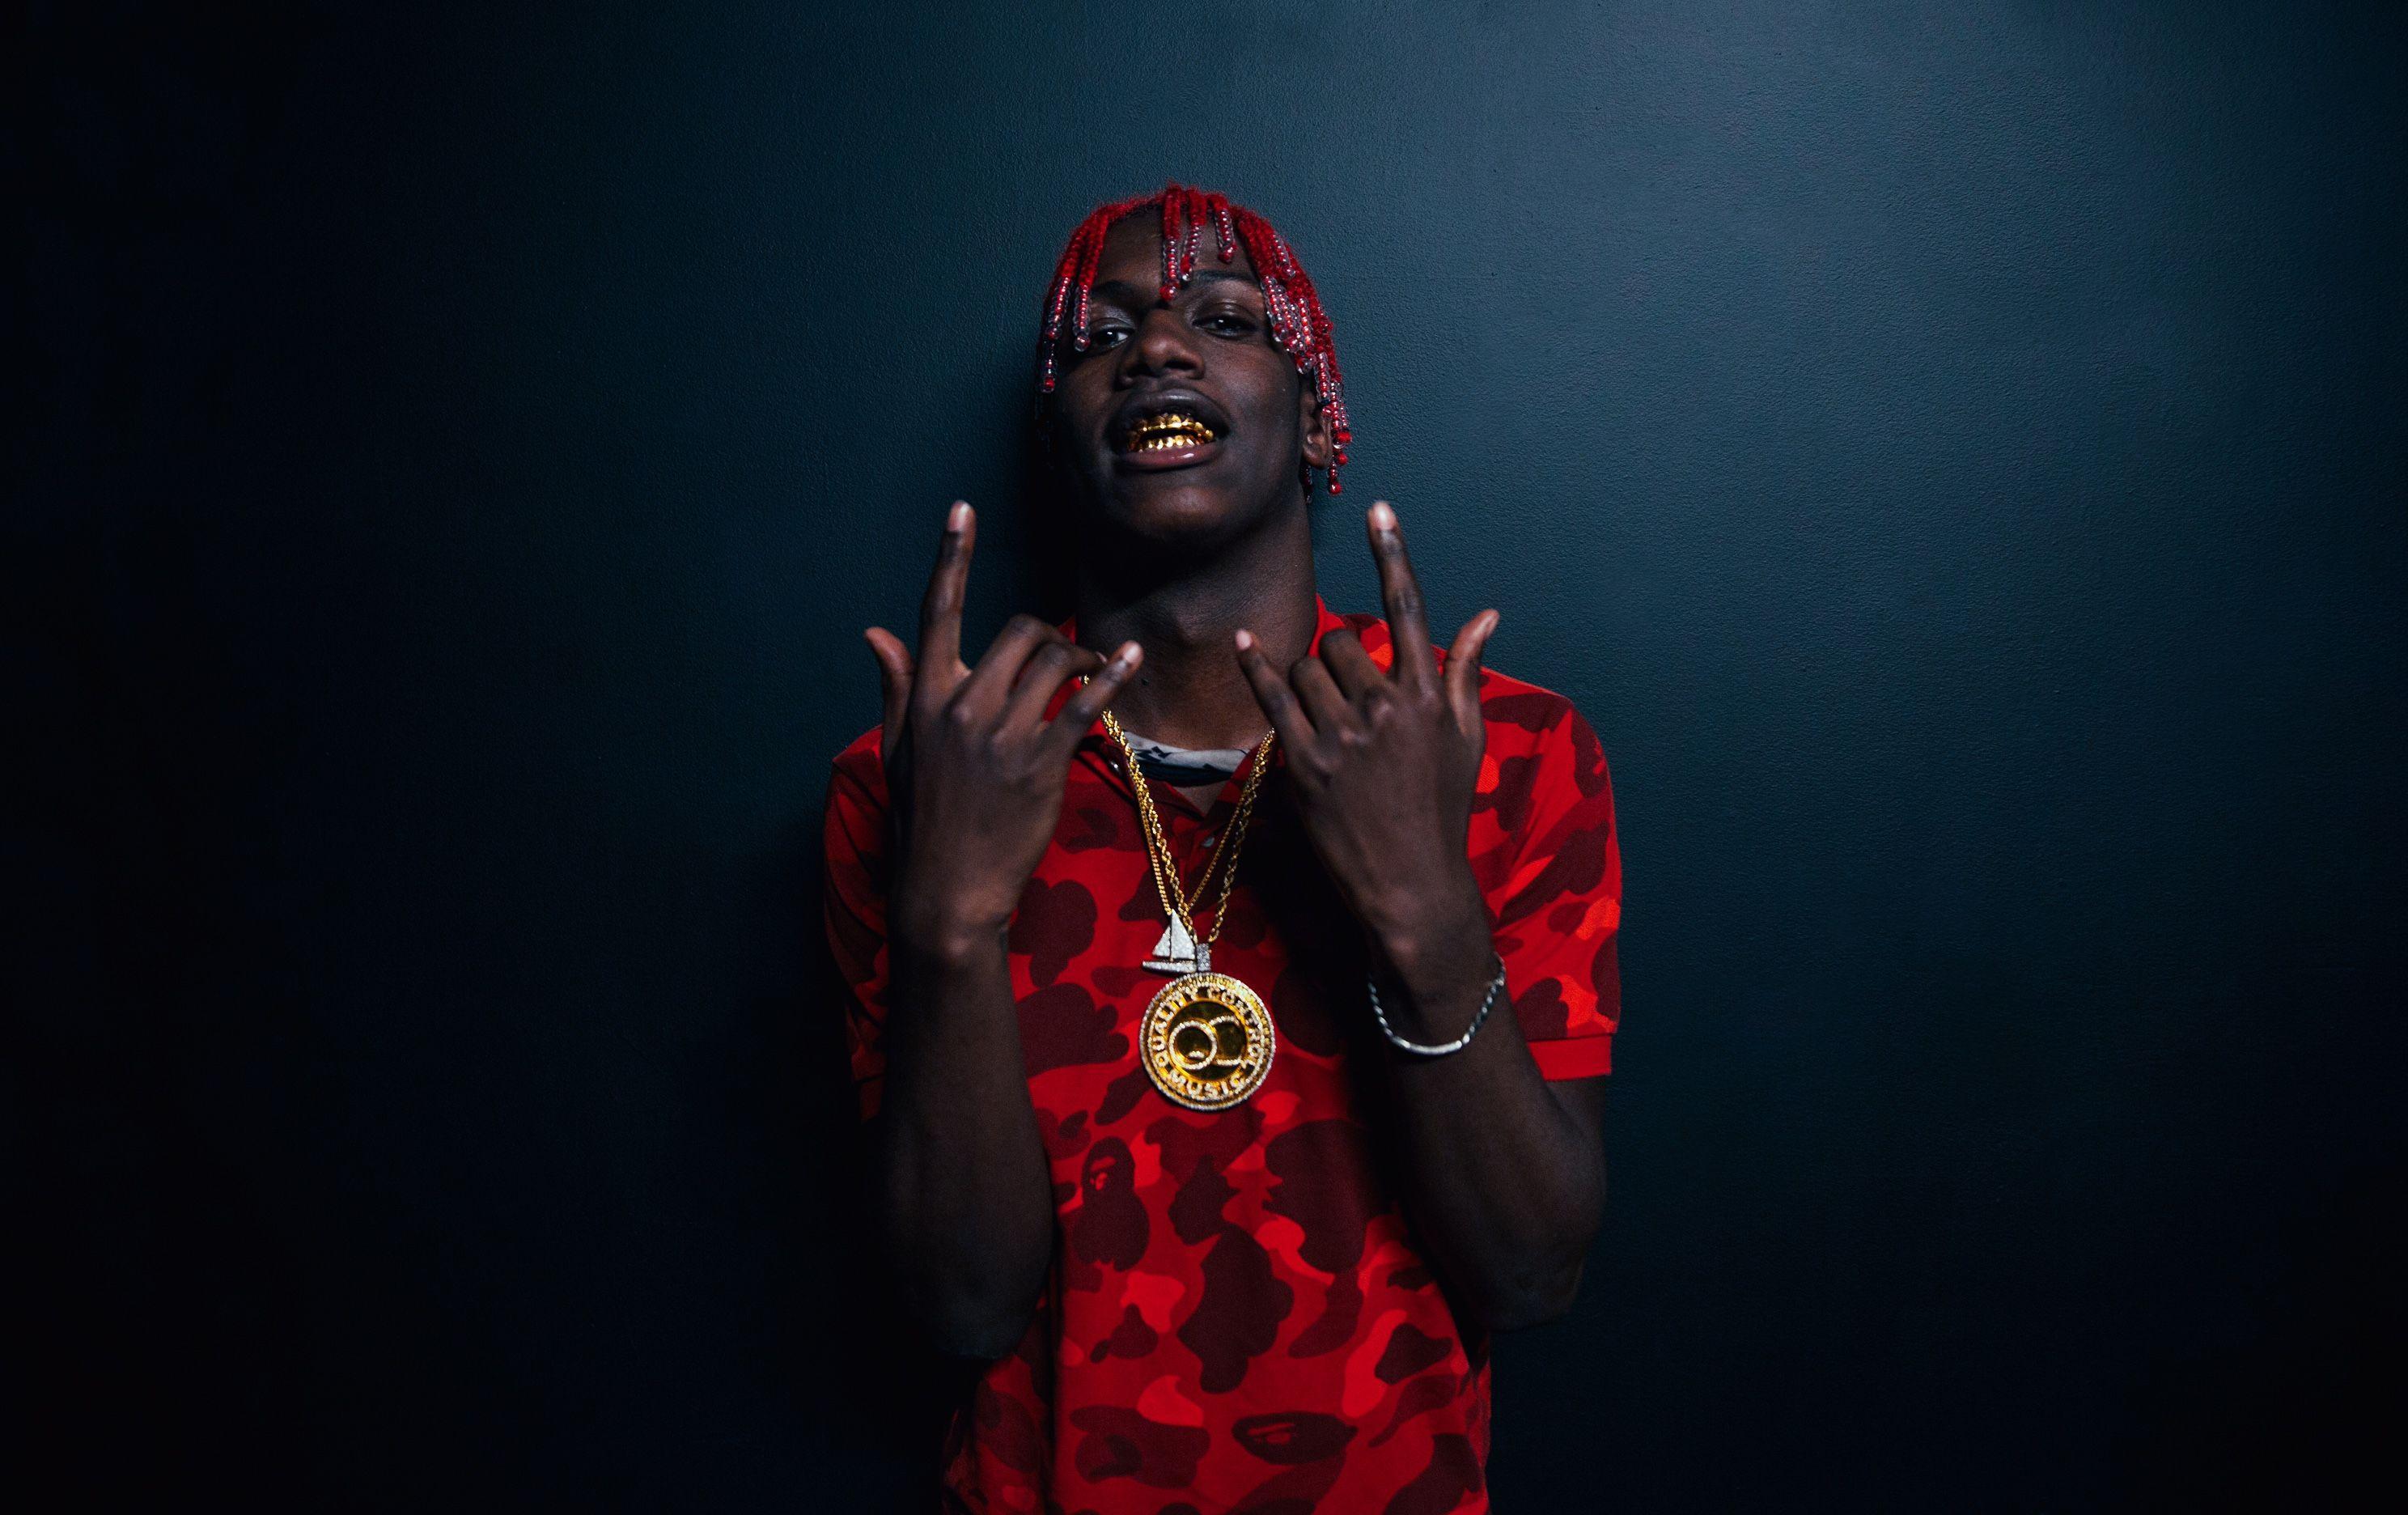 Lil Yachty Wallpaper Free Lil Yachty Background